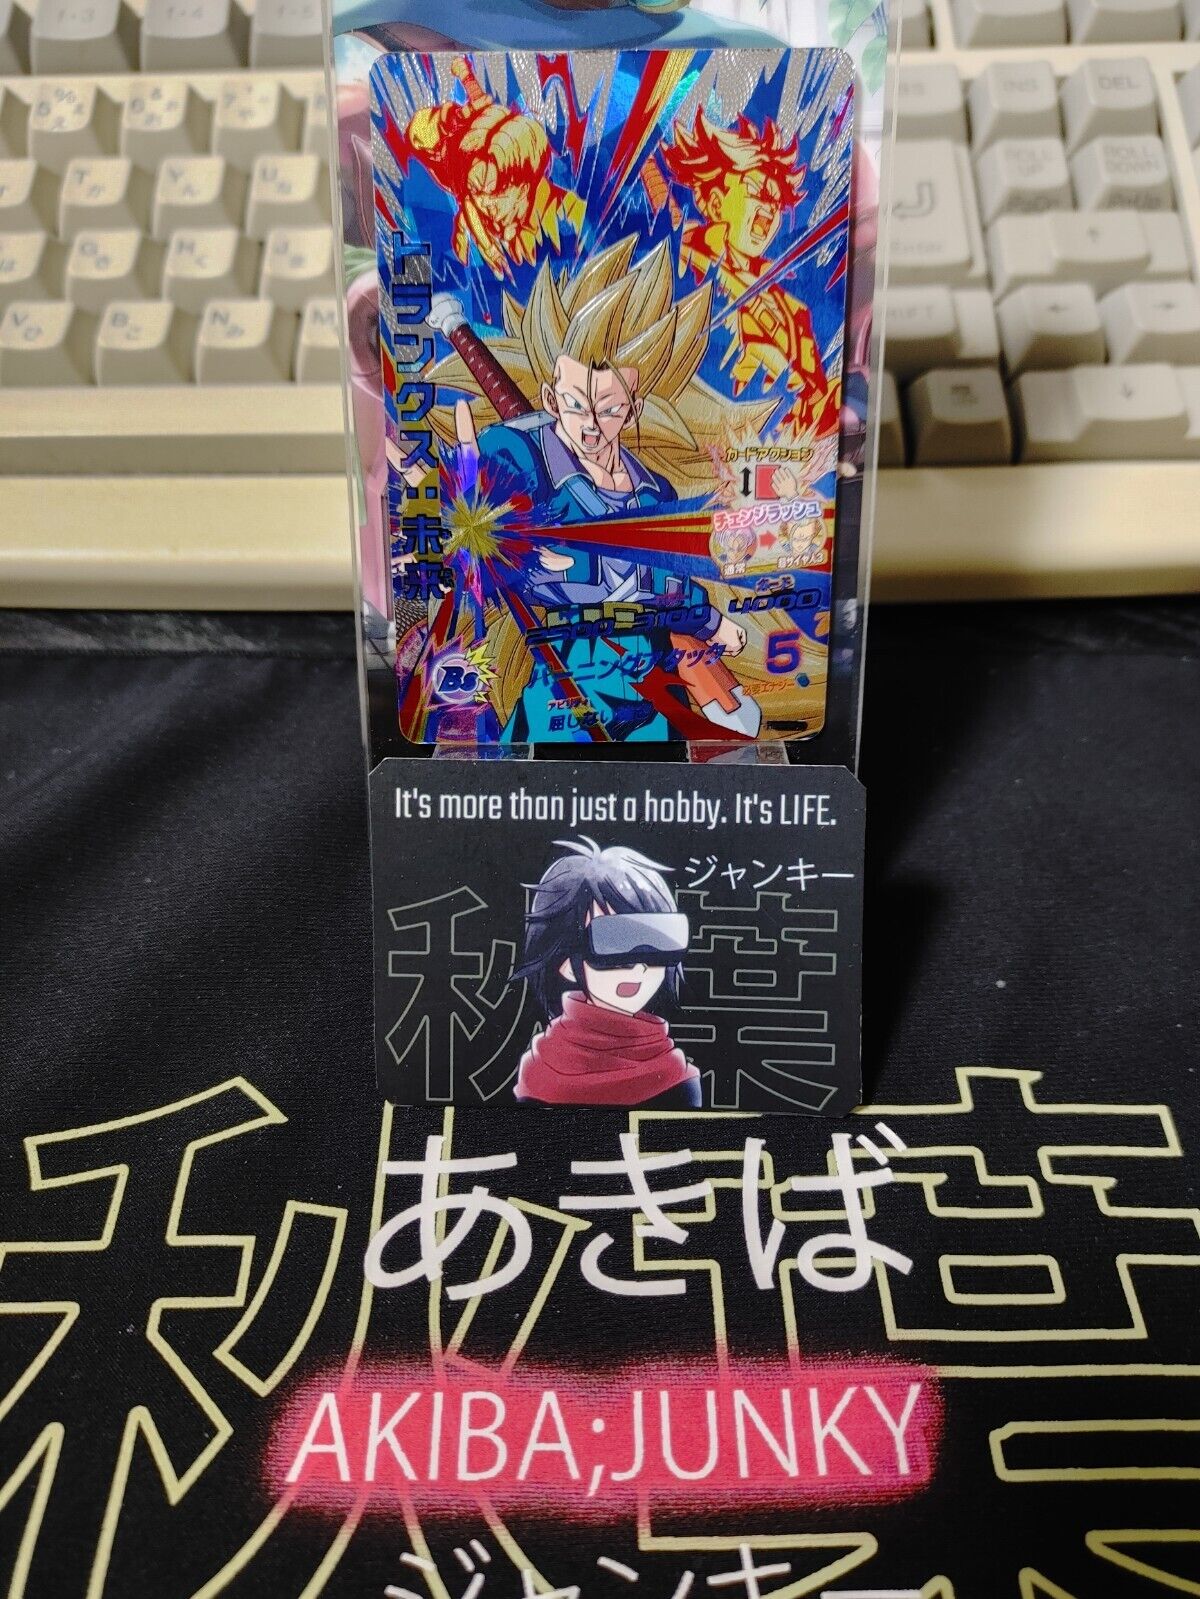 Trunks HGD9-CP4 Super Dragon Ball Heroes Card Japan Release